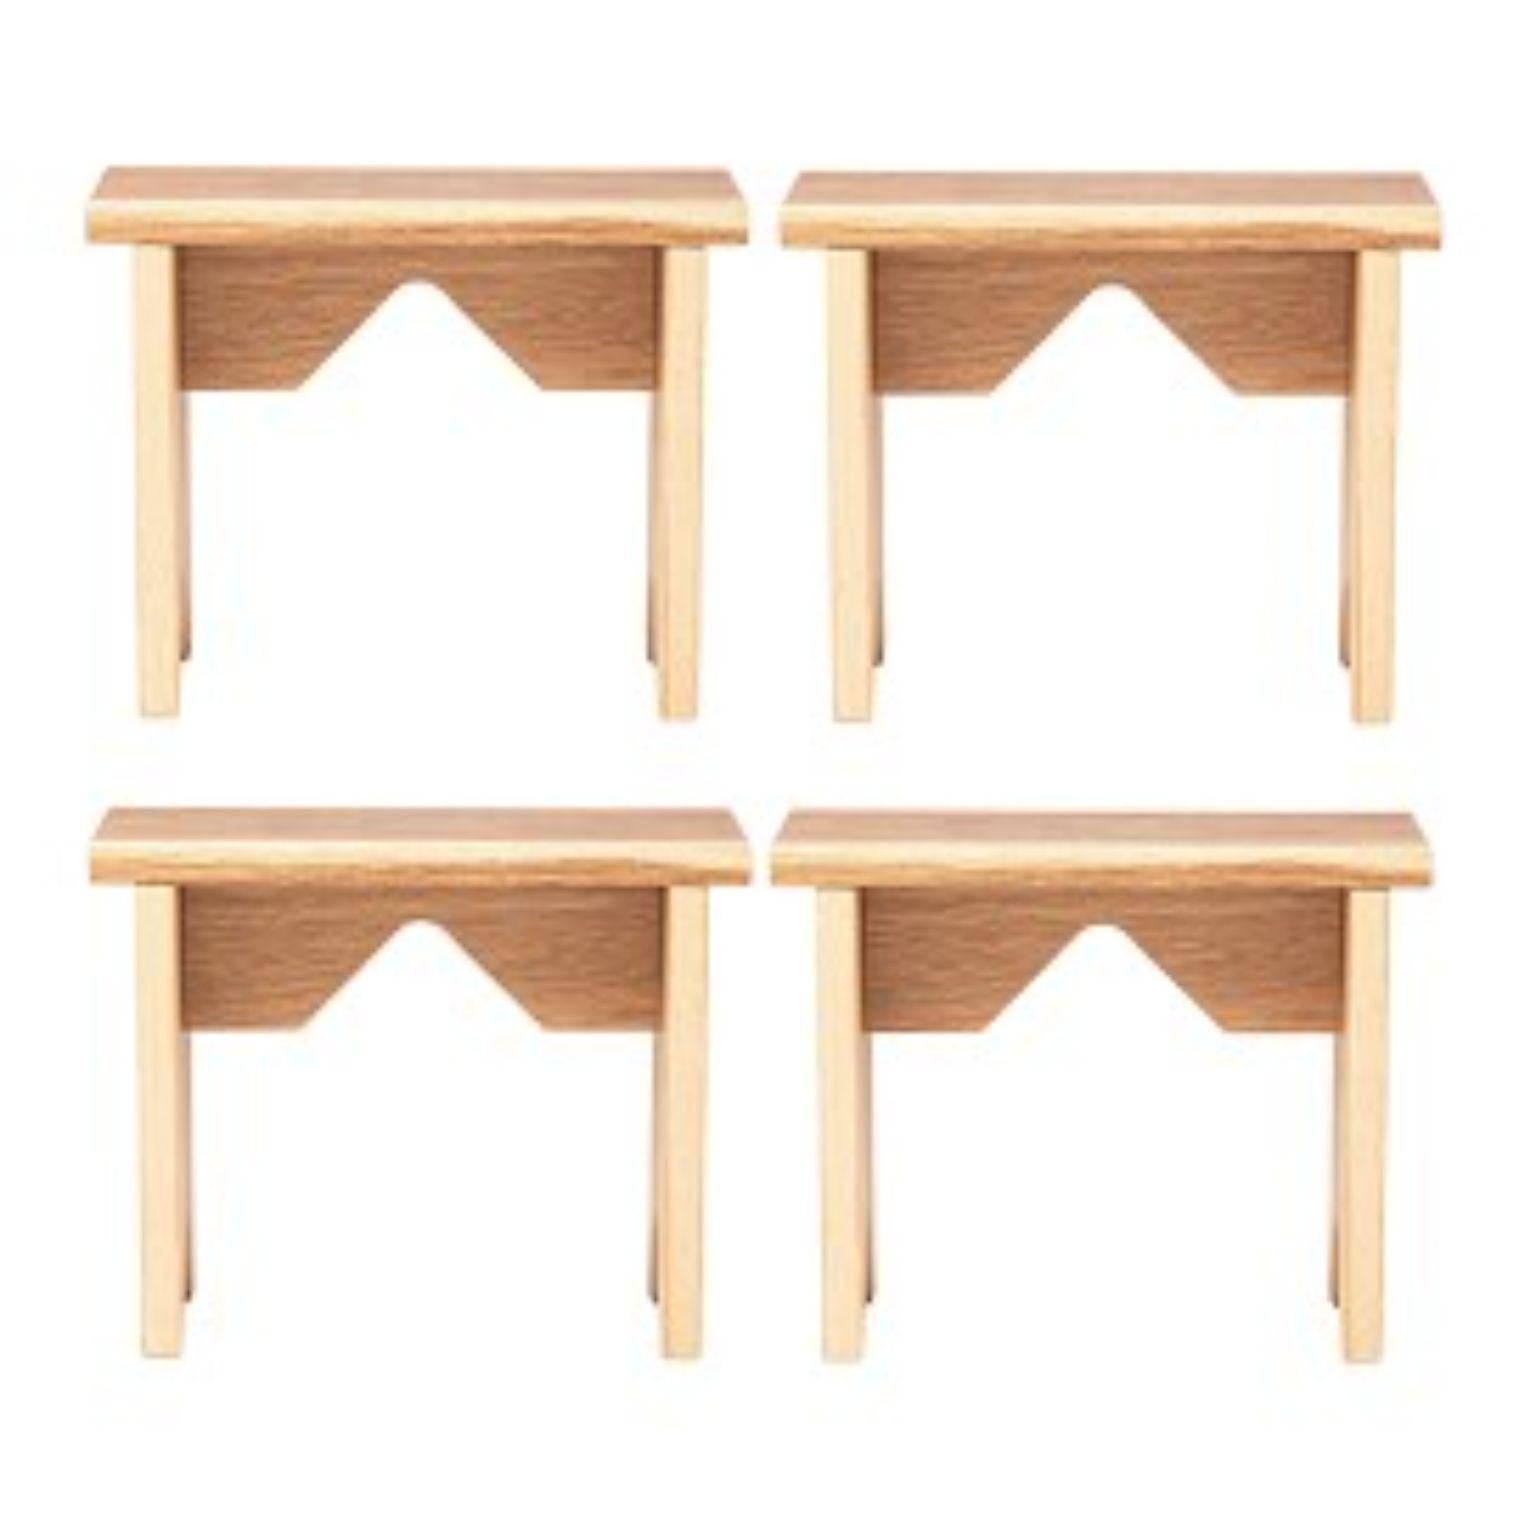 Set of 4 Oslinchik 02 Low Stools by Oito
Dimensions: D21 x W38 x H30 cm
Materials: Oak wood, wax or paint.
Weight: 4 kg
Also Available in different colours.

Wooden stools are a trend for environmental friendliness and home comfort. We try to